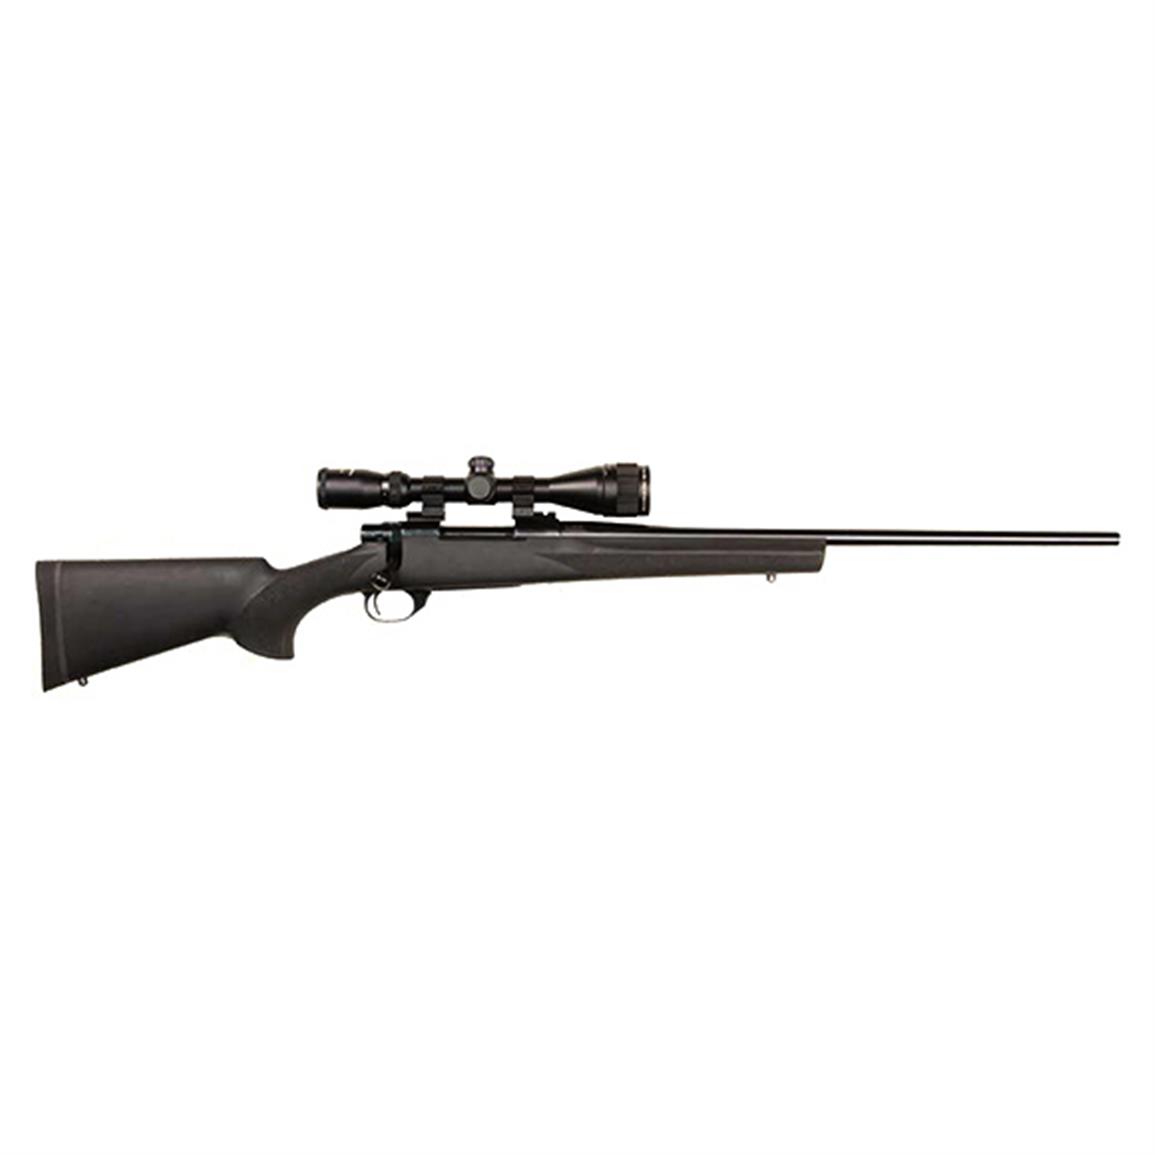 Howa Hogue Youth Rifle, Bolt-Action, .243 Winchester, Nikko Stirling 3-9x40mm Scope, 5 Rounds